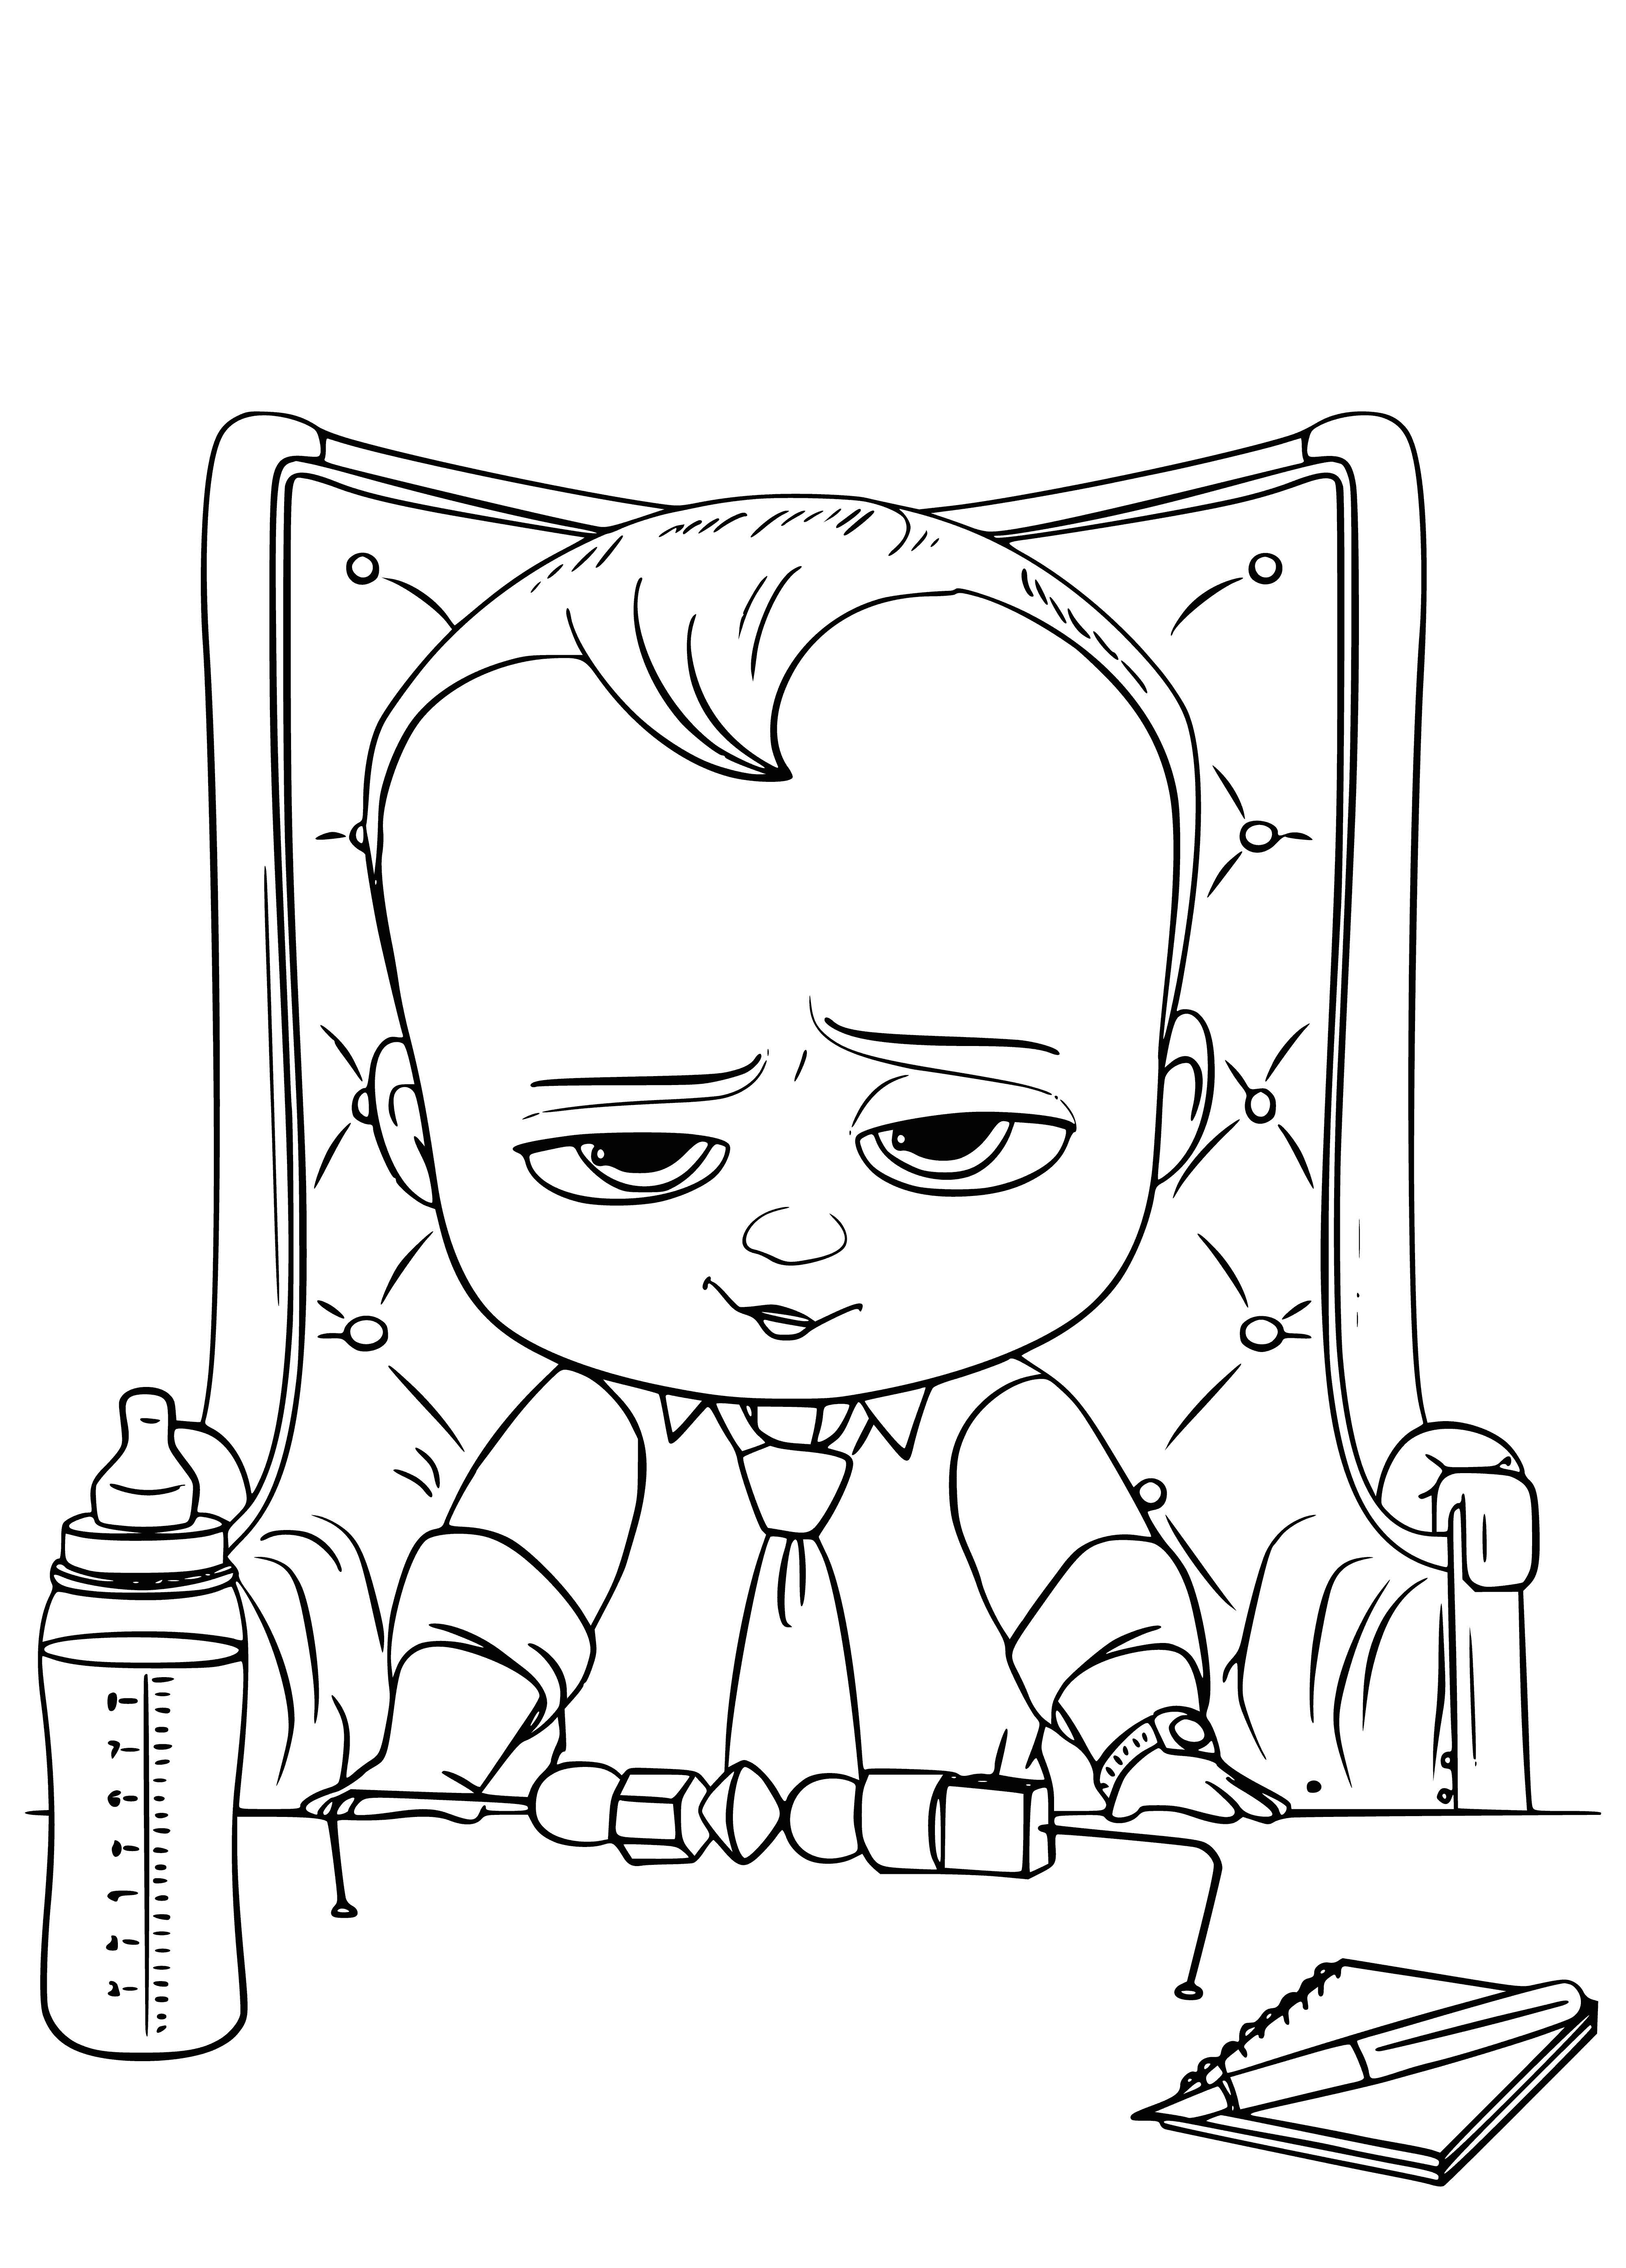 coloring page: The Boss Baby is a smart baby who knows what to do and always gets his way. #TheBossBaby